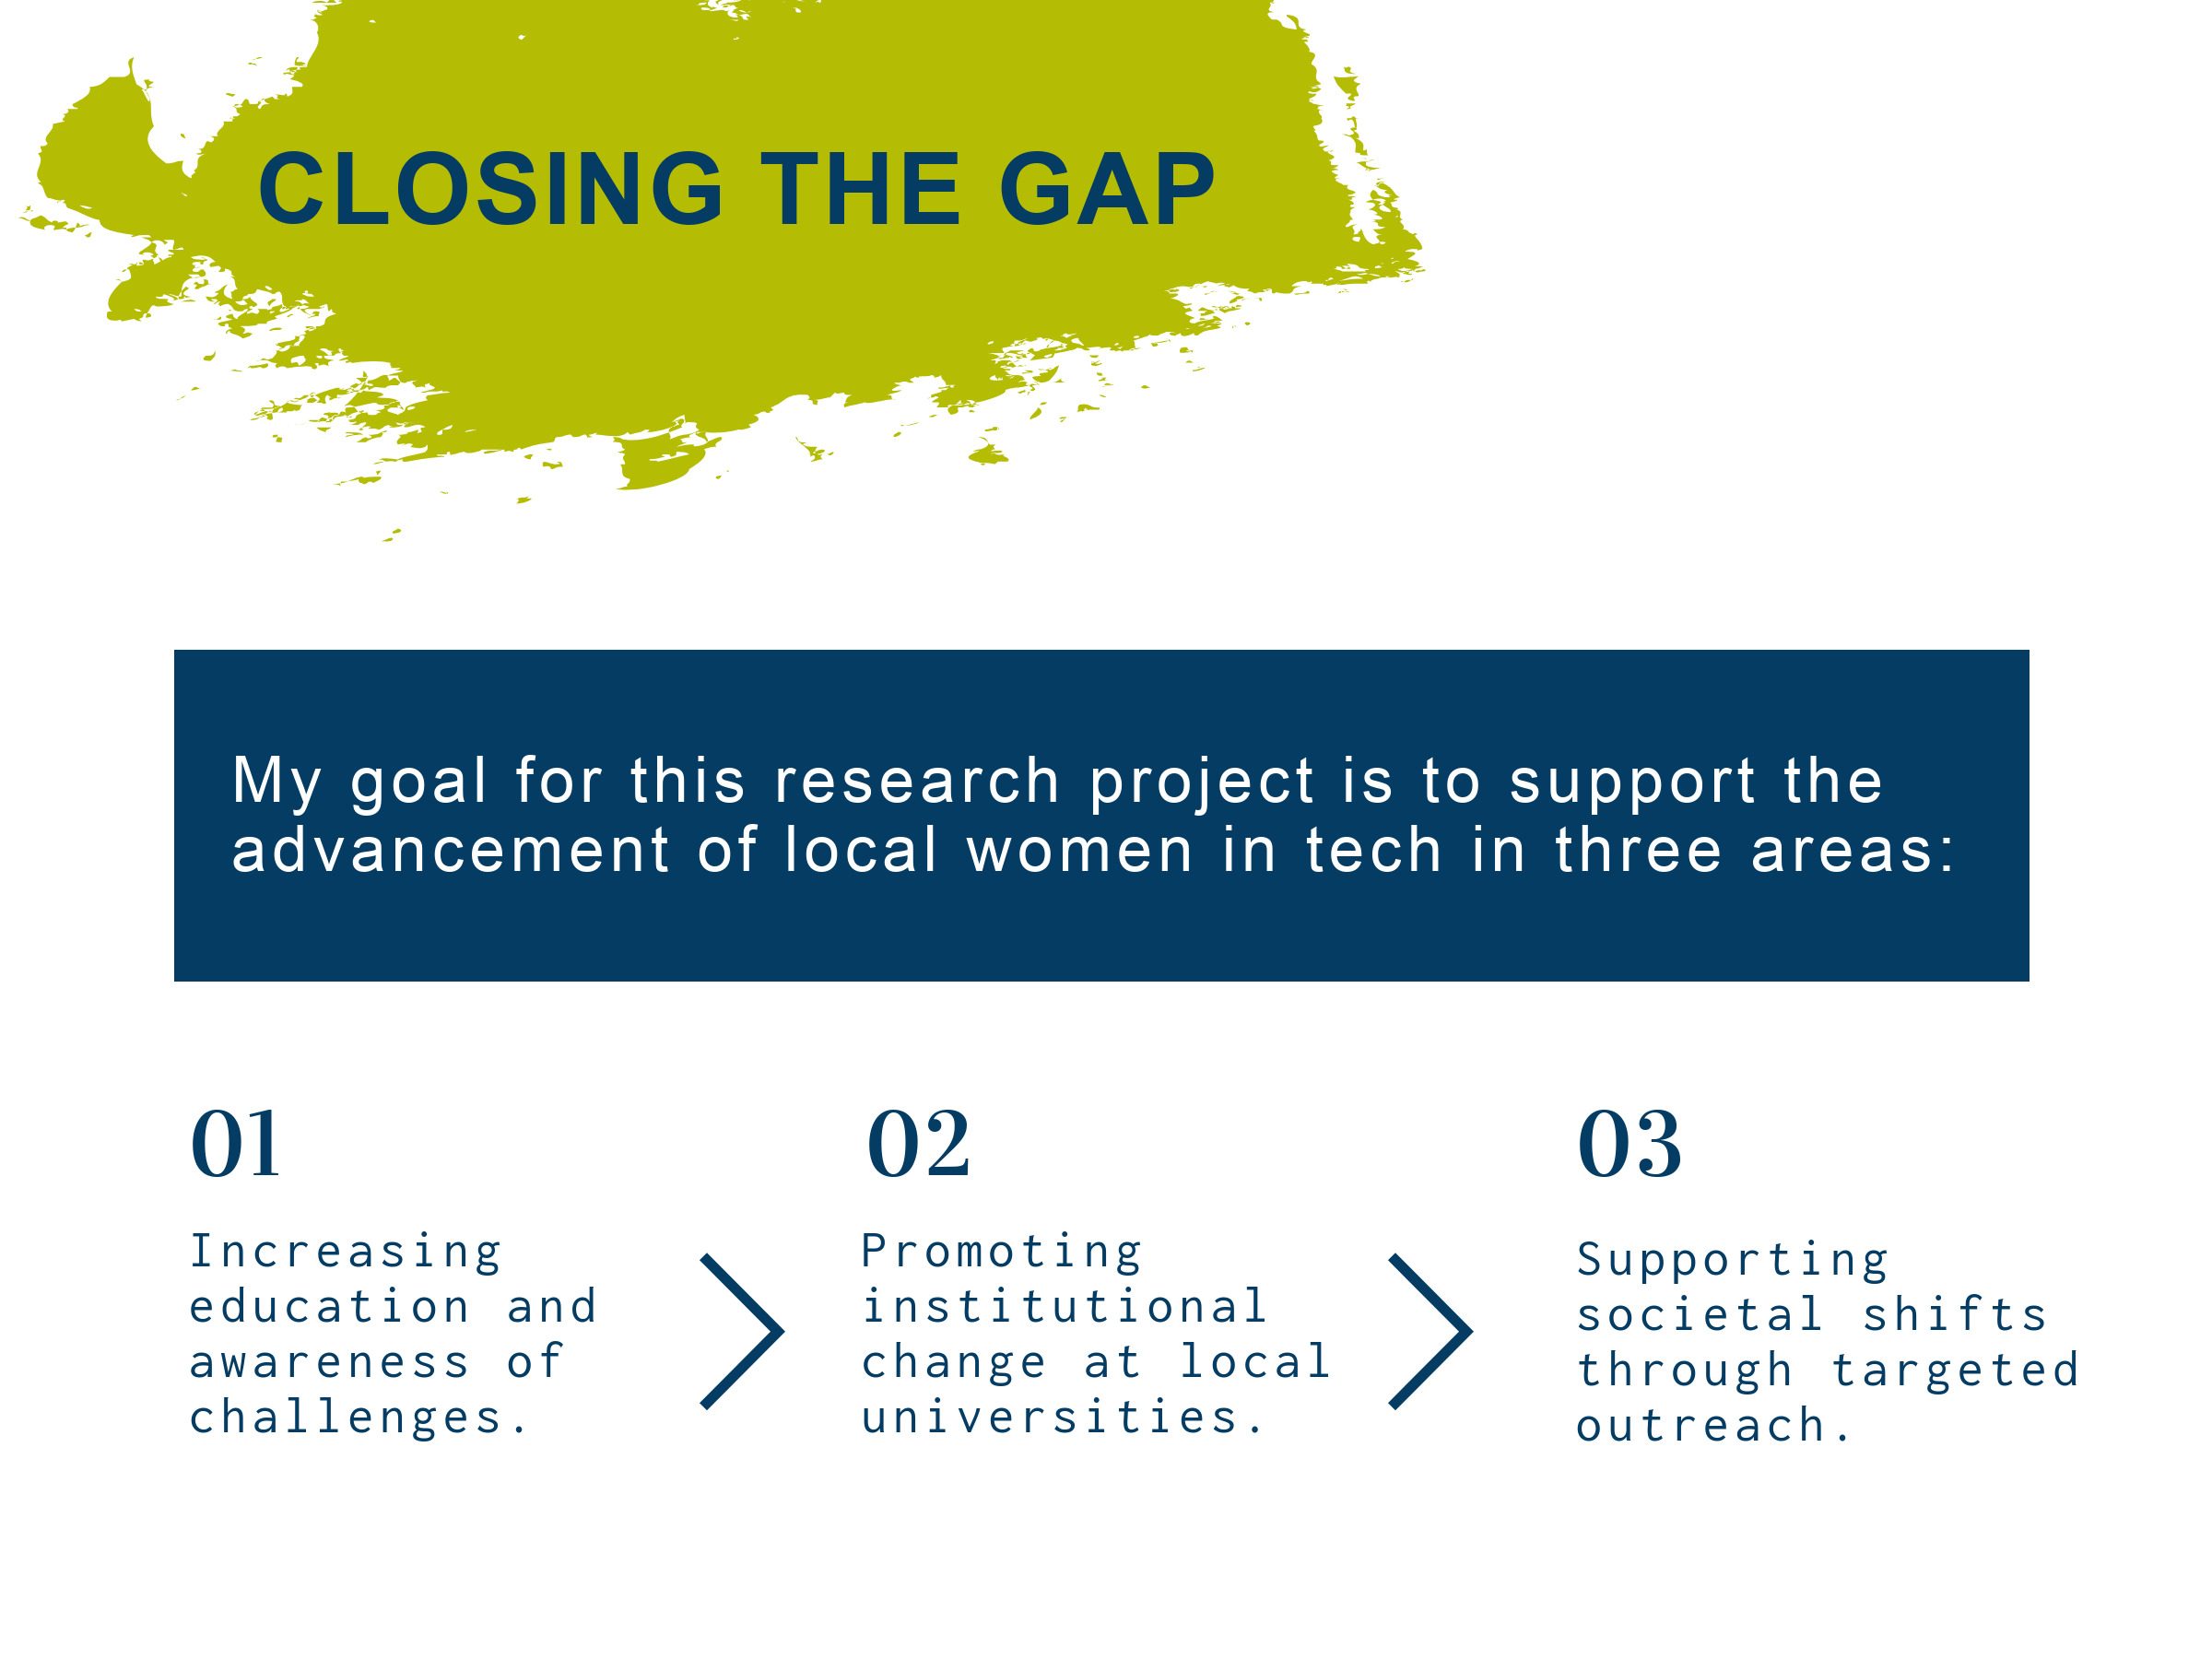 Closing the Gap. My goal for this research project is to support the advancement of local women in tech in three areas: 1) Increasing education and awareness of challenges. 2) Promoting institutional change at local universities. 3) Supporting societal shifts through targeted outreach.